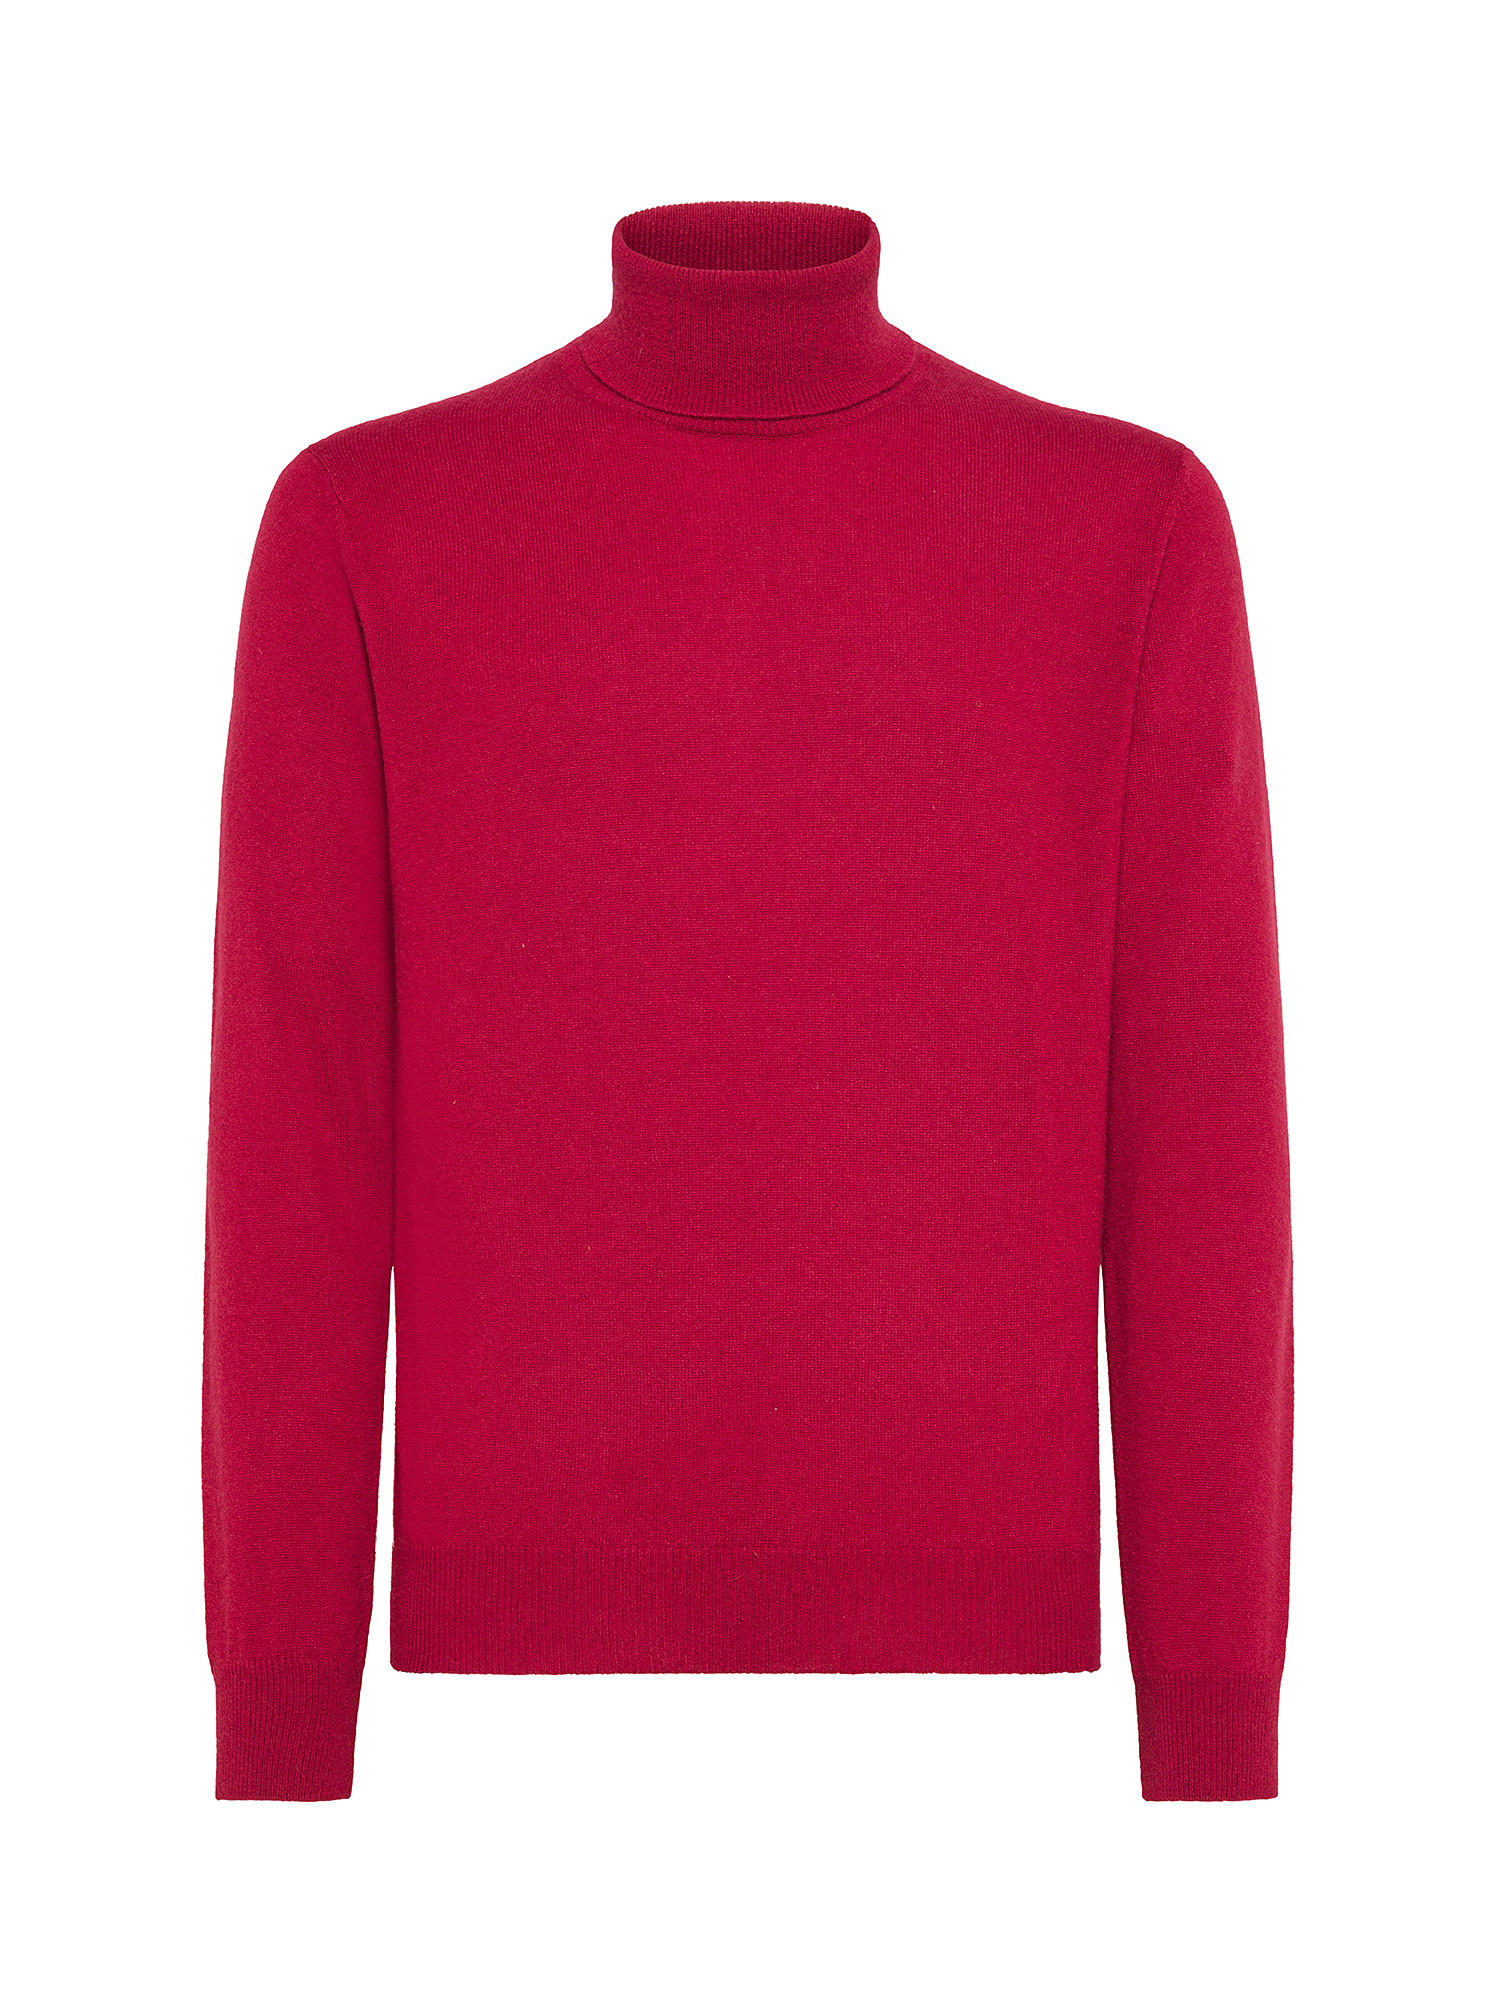 Coin Cashmere - Turtleneck in pure cashmere, Red, large image number 0